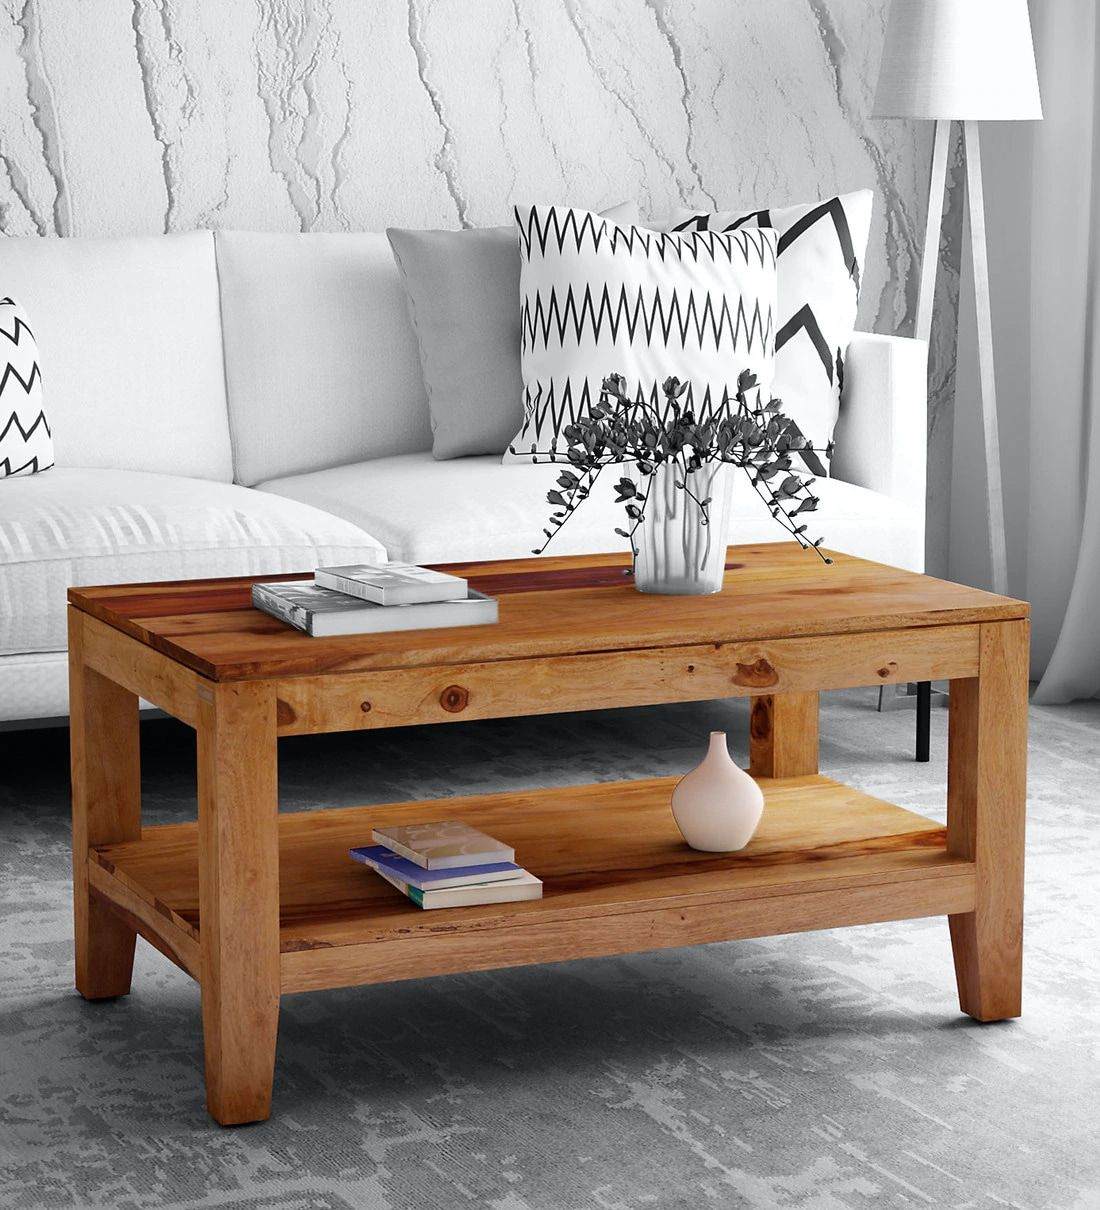 Buy Anitz Solid Wood Coffee Table In Warm Walnut Finish In Walnut Wood And Gold Metal Coffee Tables (View 15 of 15)